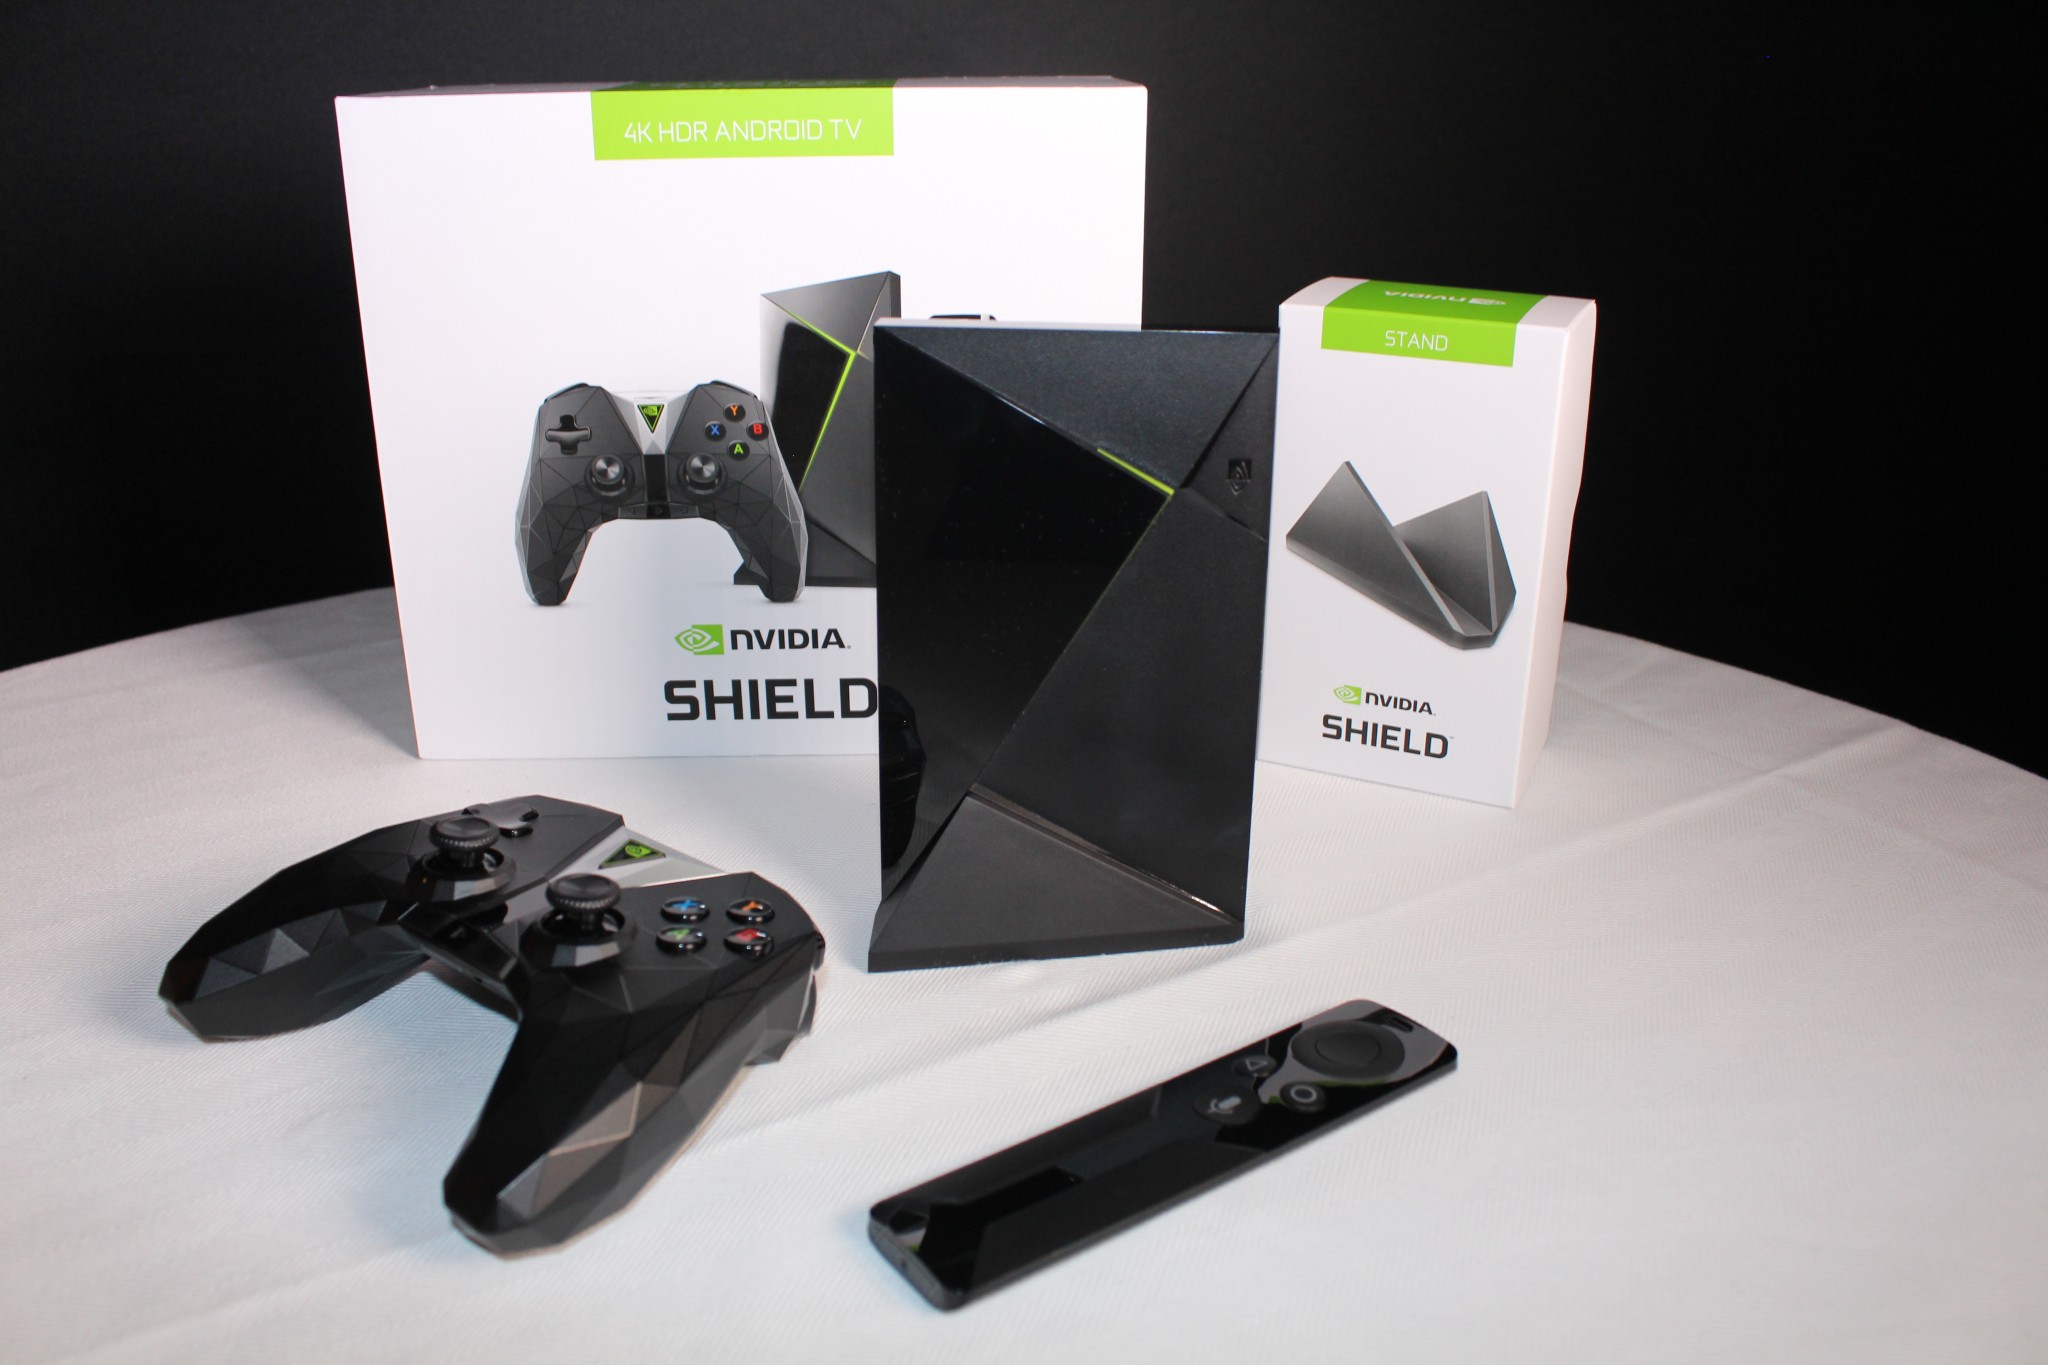 The New Nvidia Shield Passes Through FCC’s Bluetooth Certification